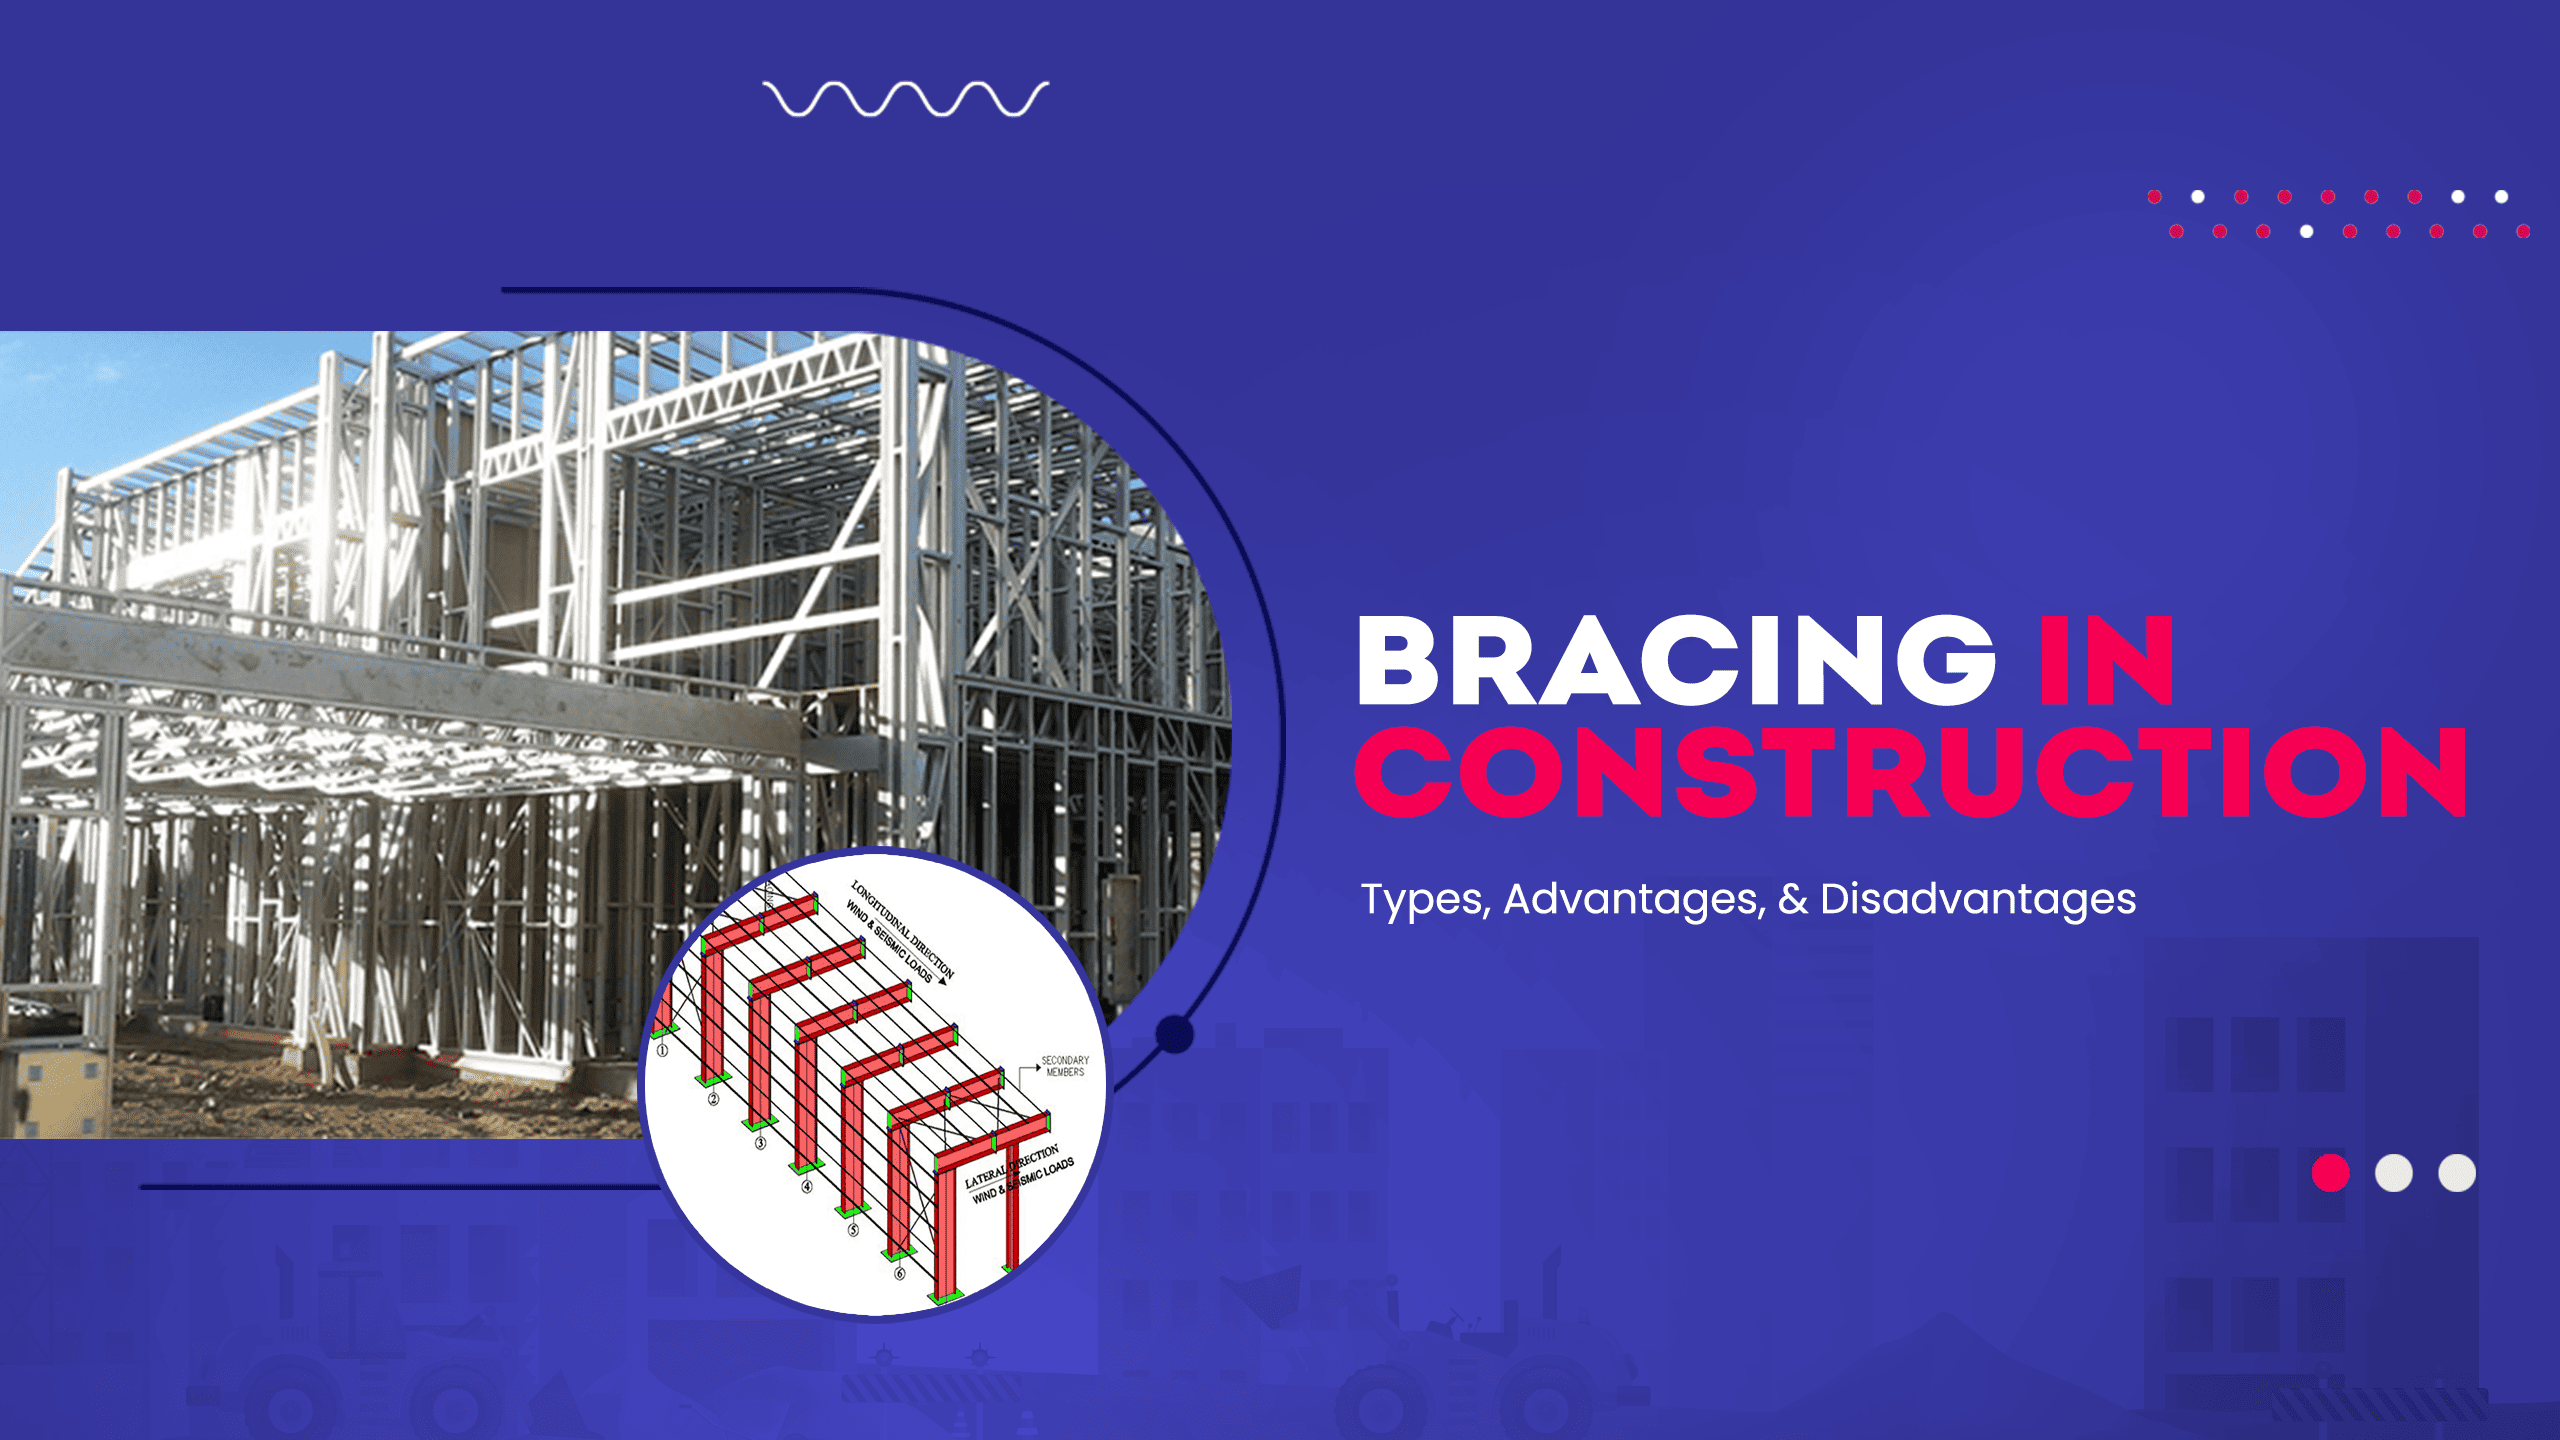 Image showing pictures of types of bracing used in construction. Image has the following heading text - Bracing in construction